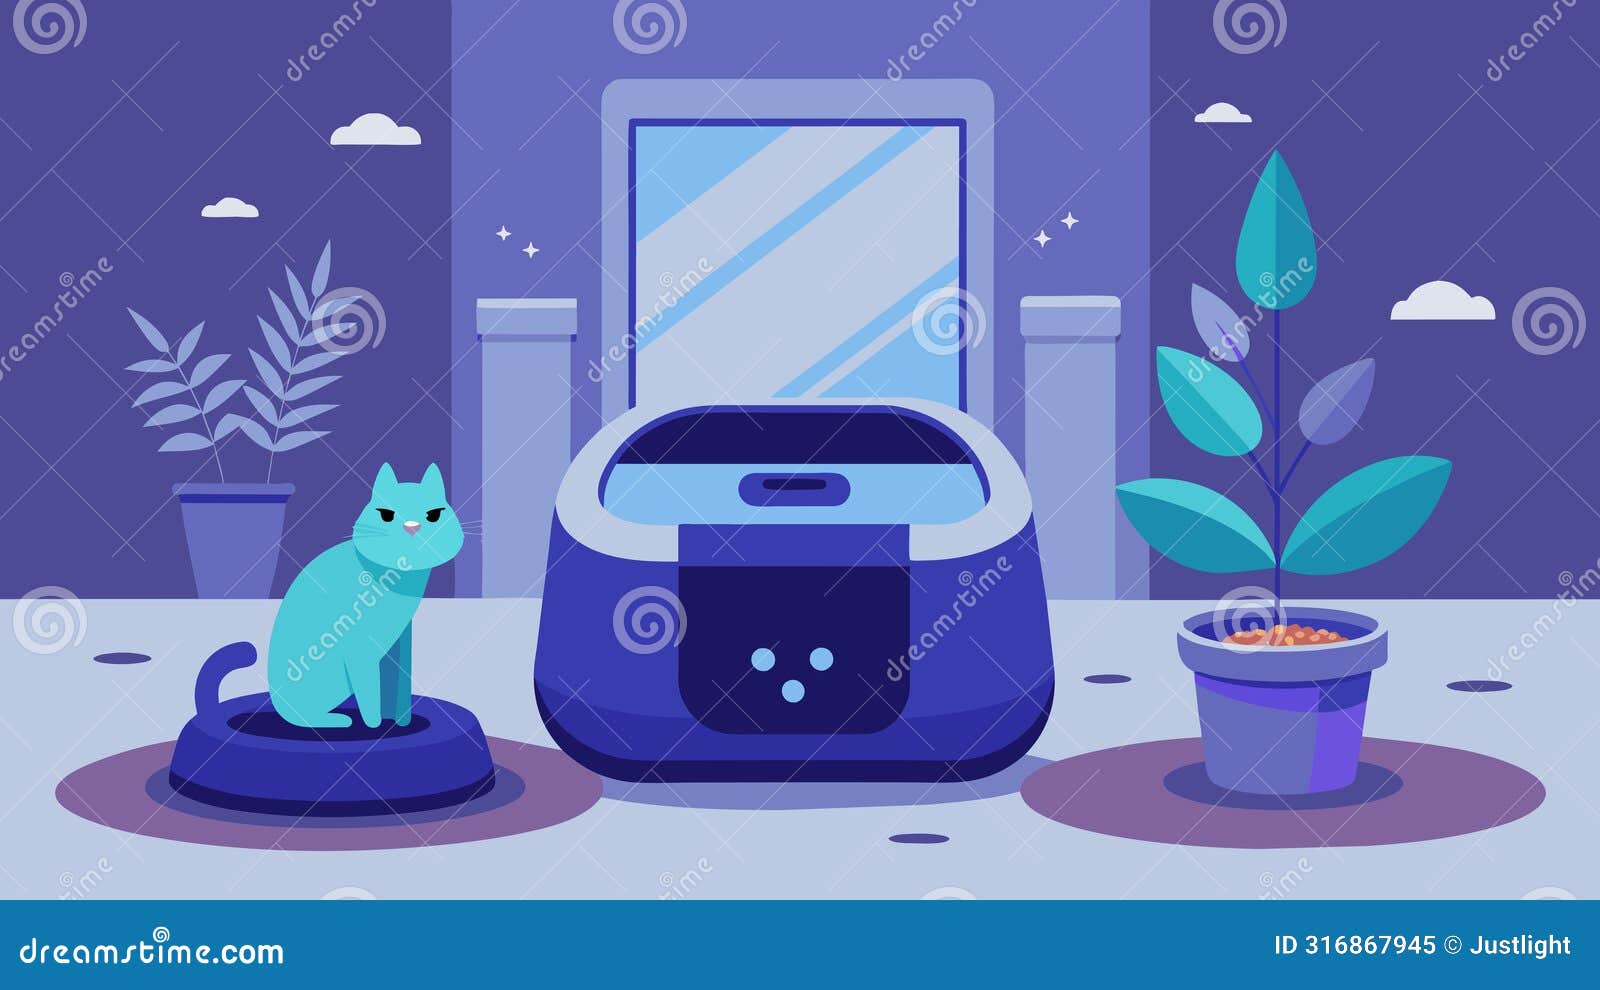 a smart litter box enclosure that automatically seals and deodorizes after each use keeping your home smelling fresh